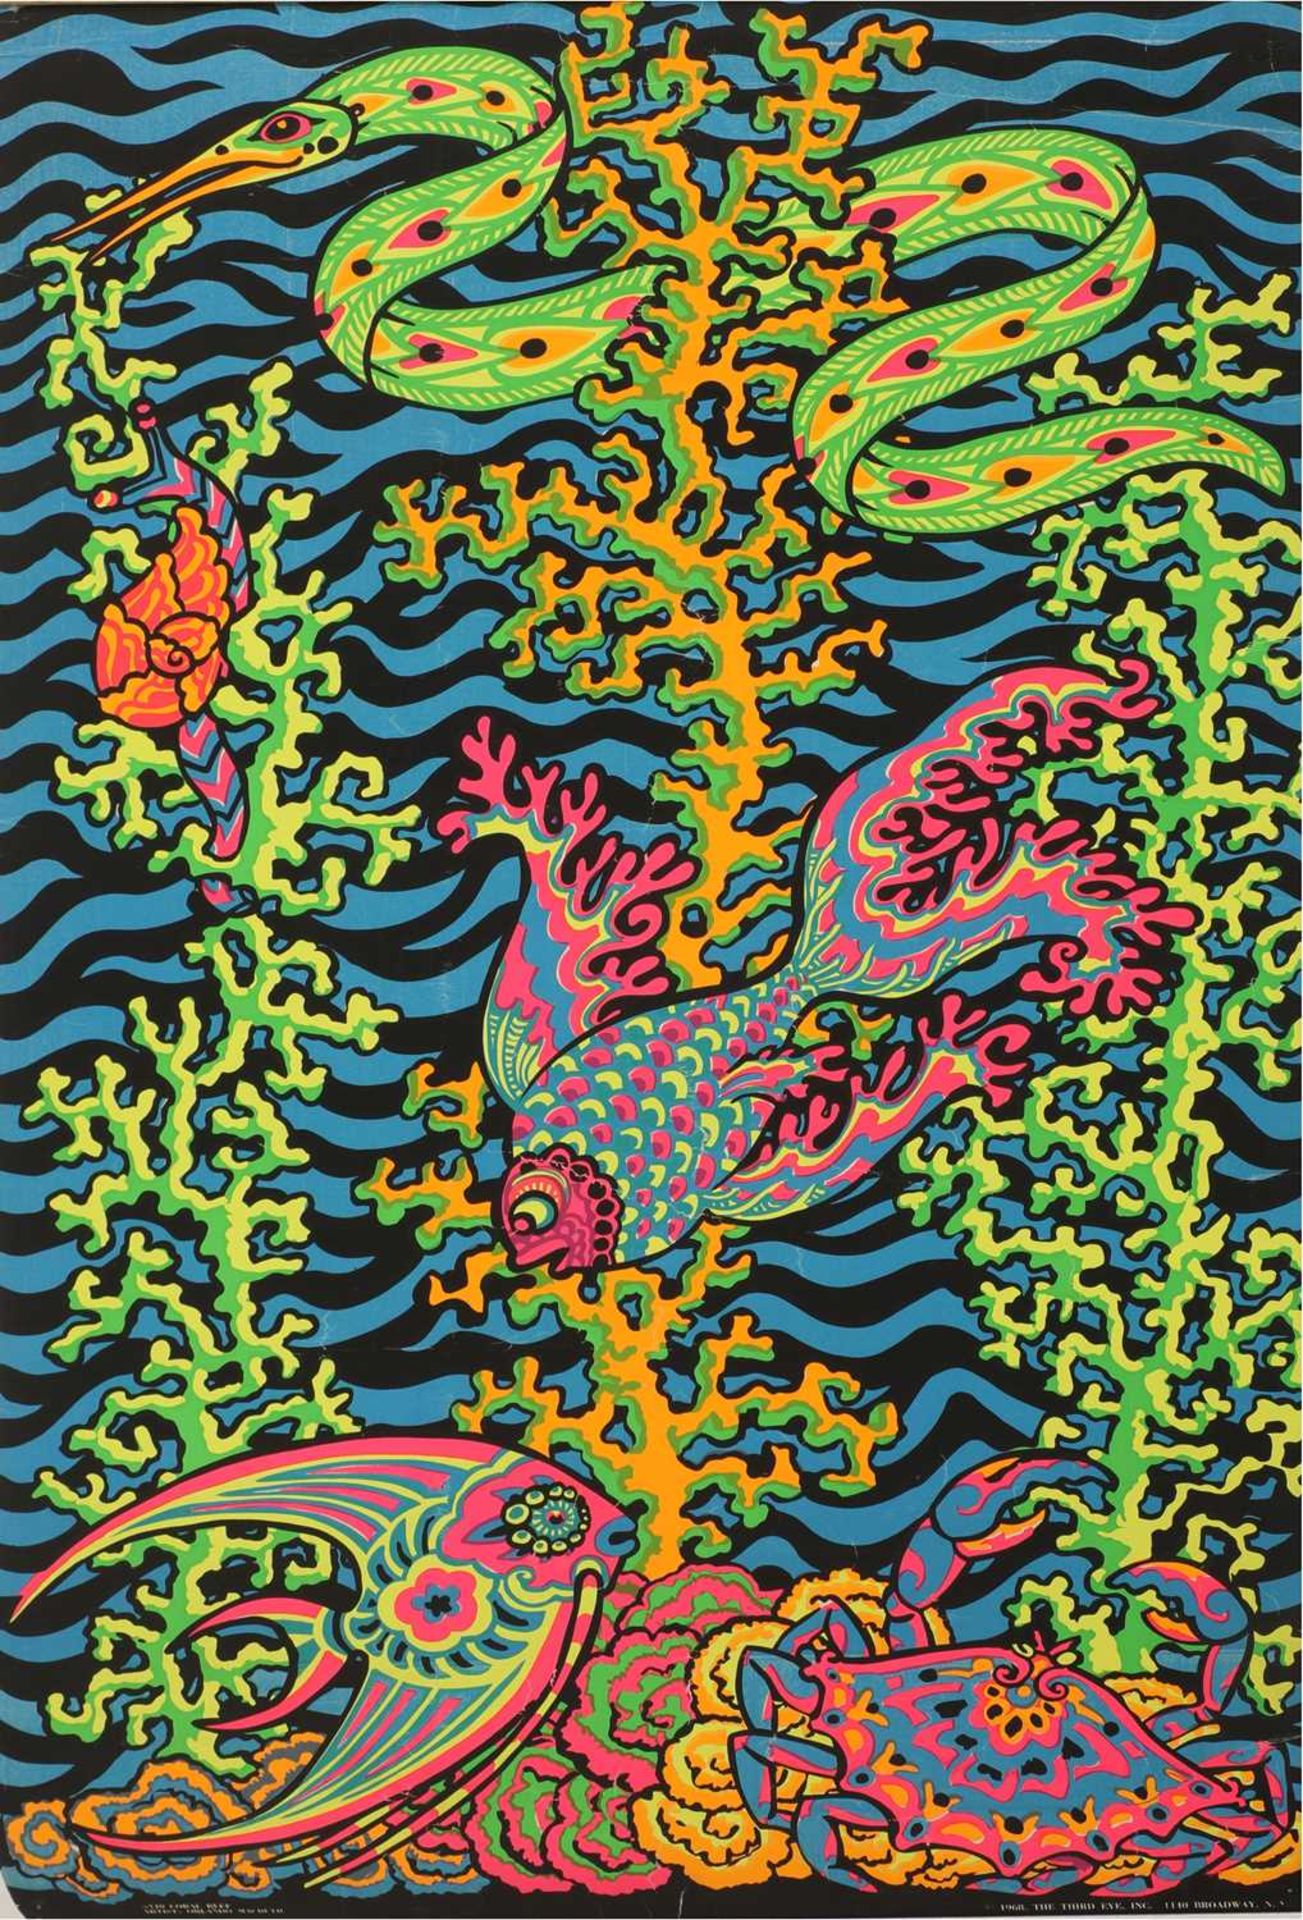 An American psychedelic blacklight poster,